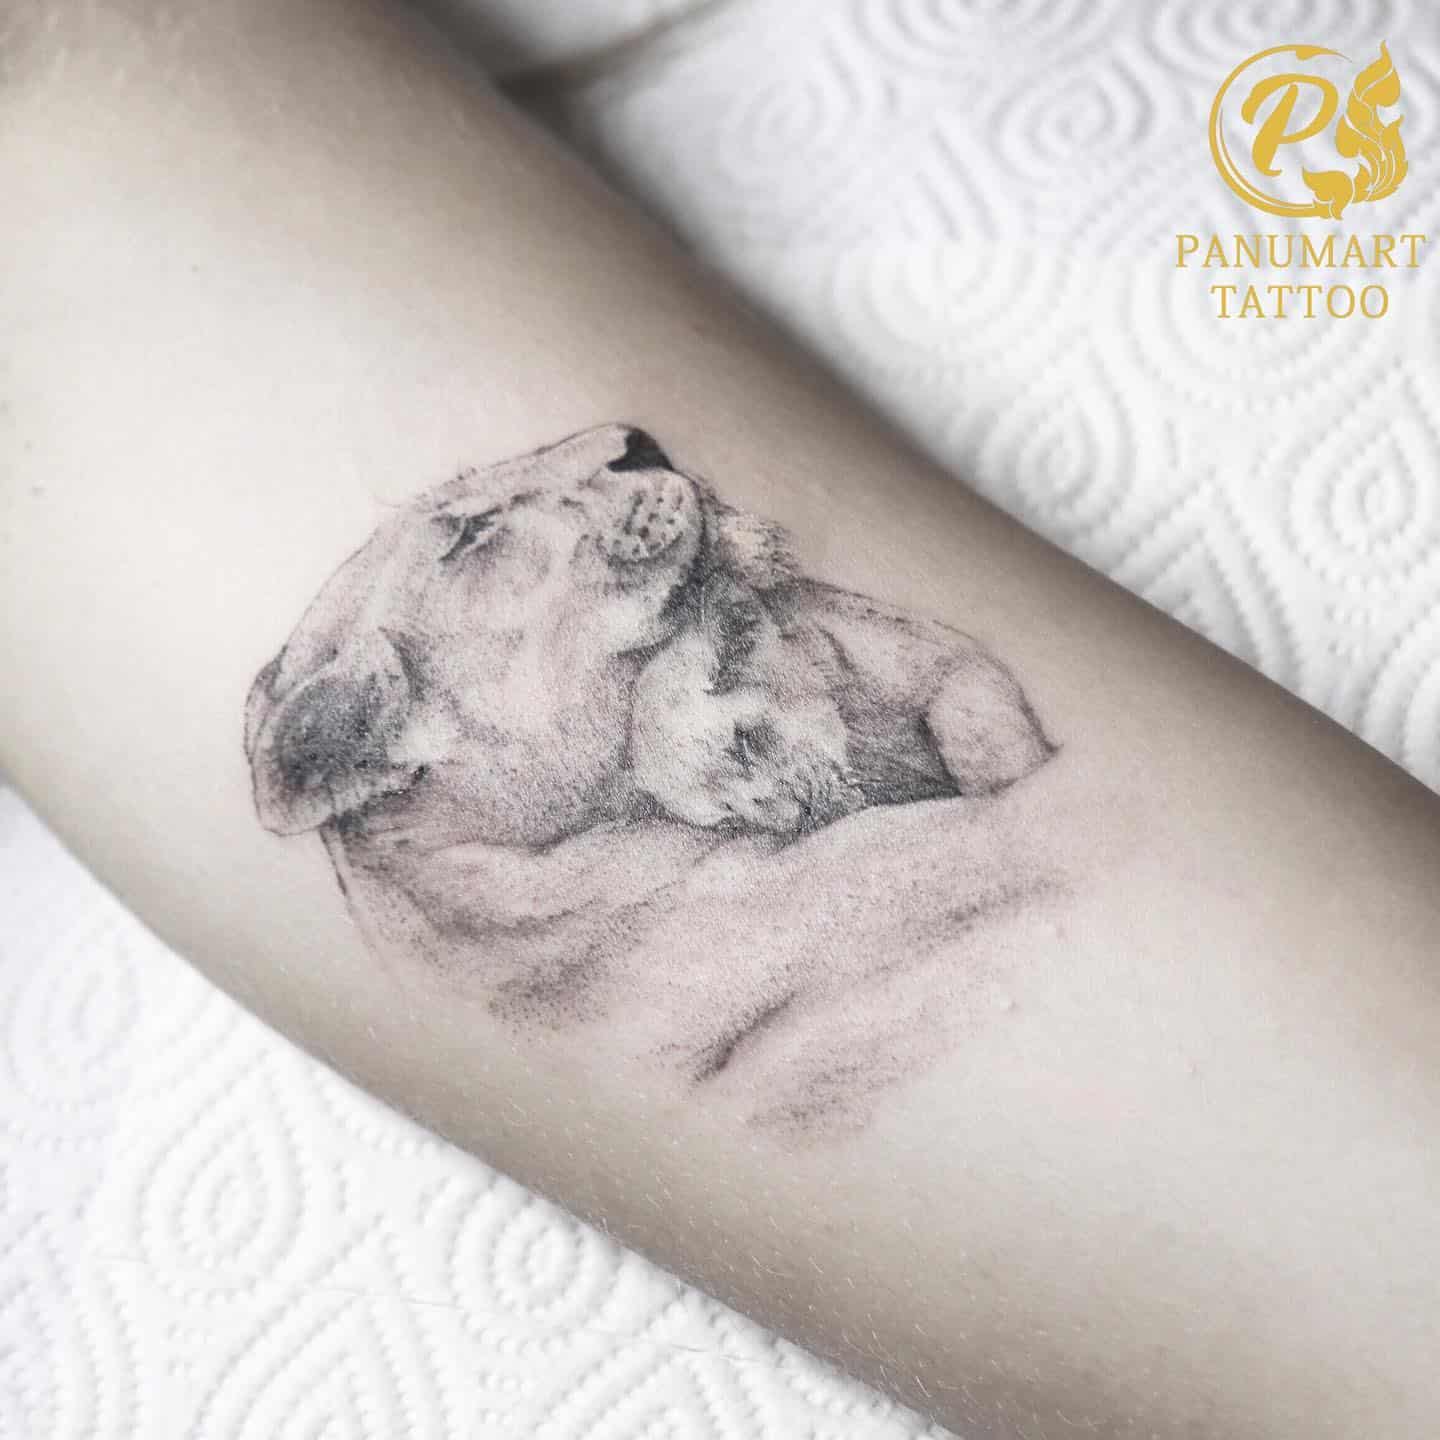 Heart of a lion done by Elvin Tattoo, Singapore. : r/tattoos